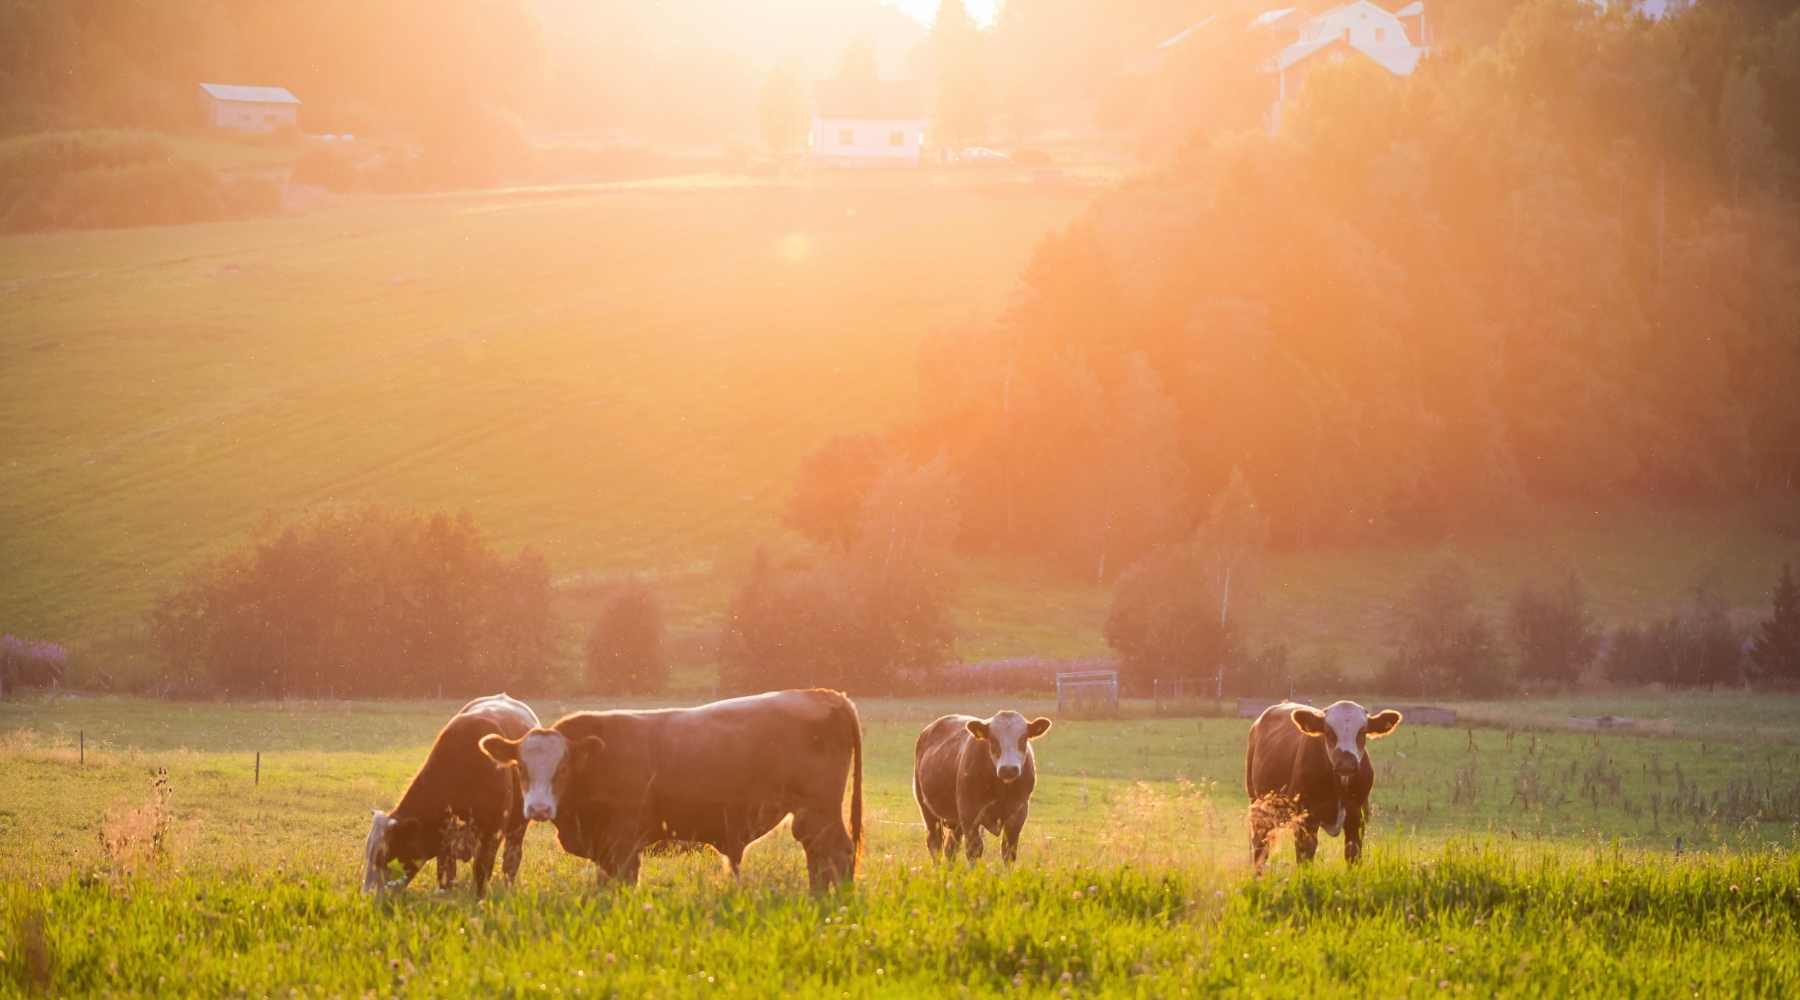 Going vegan protects our soil and farmland